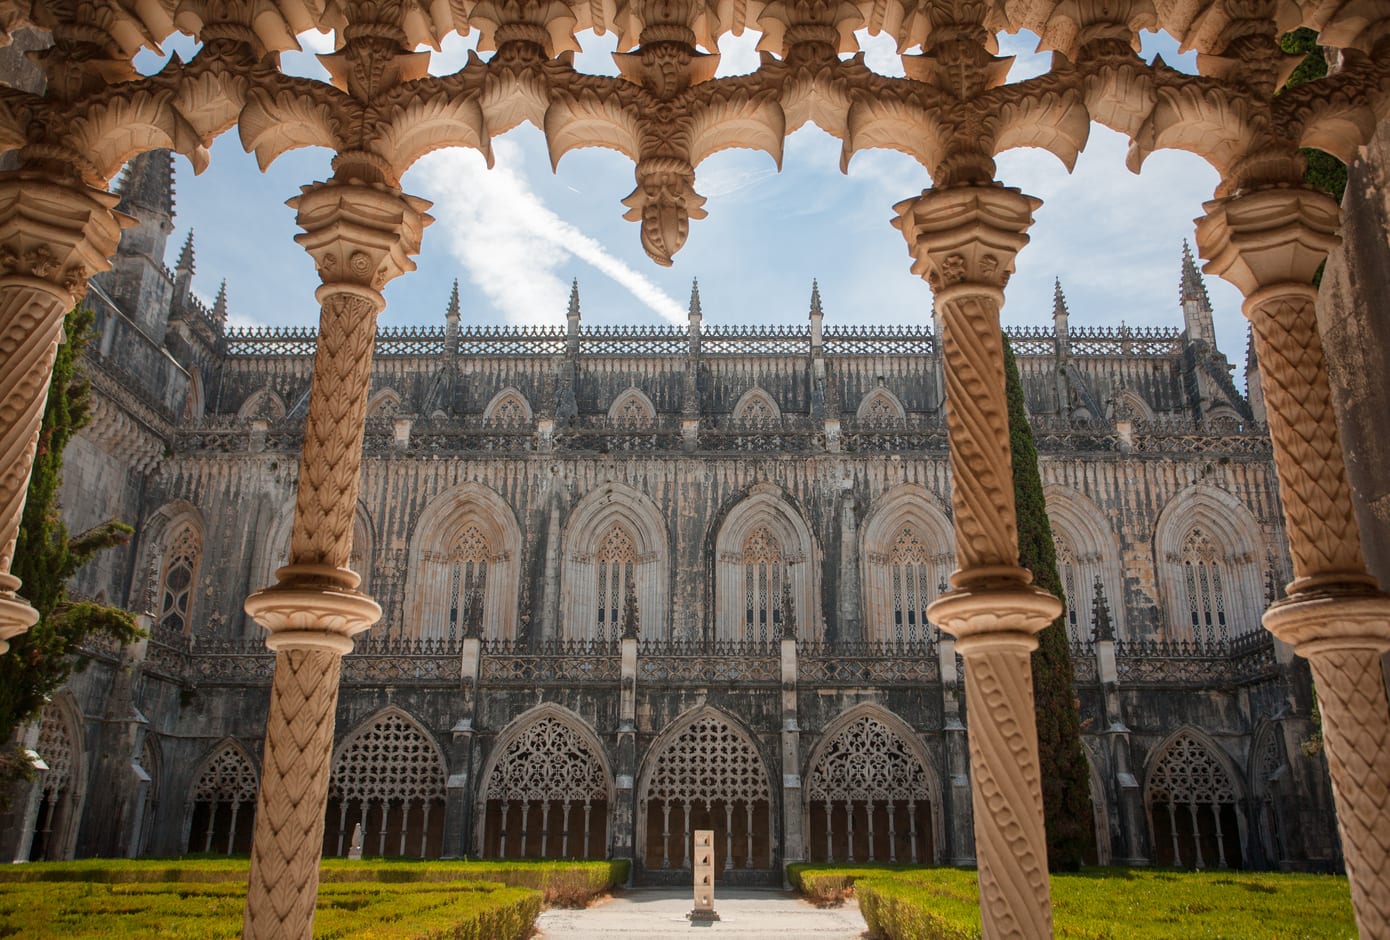 The monastery of Batalha with gothic towers, in Portugal